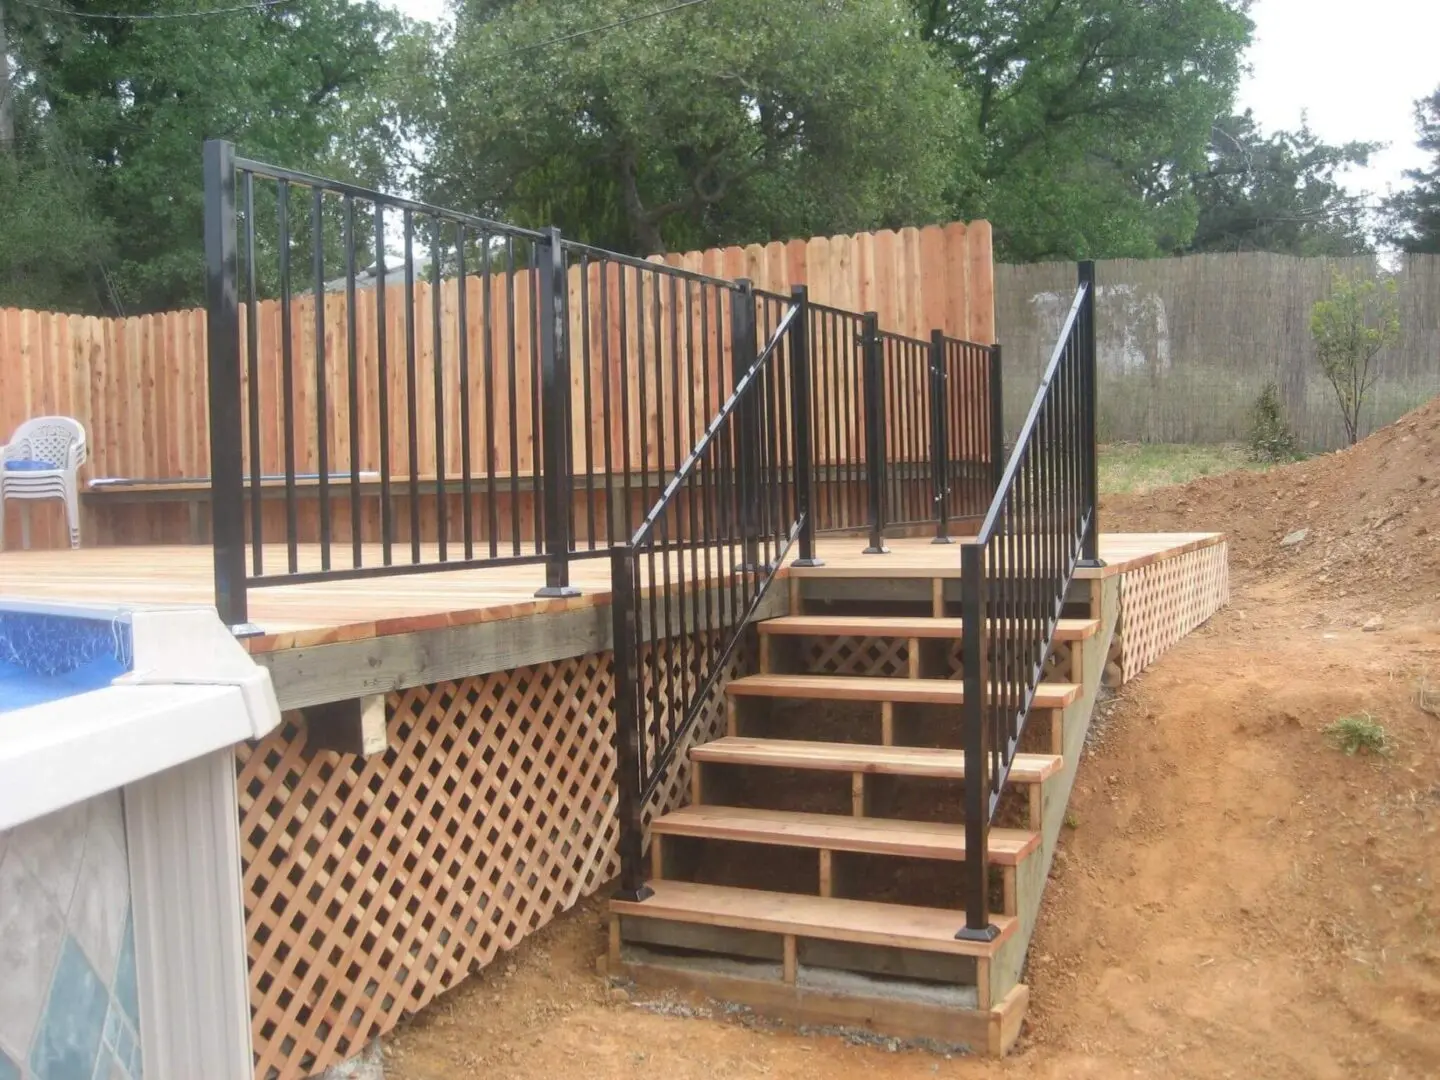 A wooden deck with steps and metal railing.